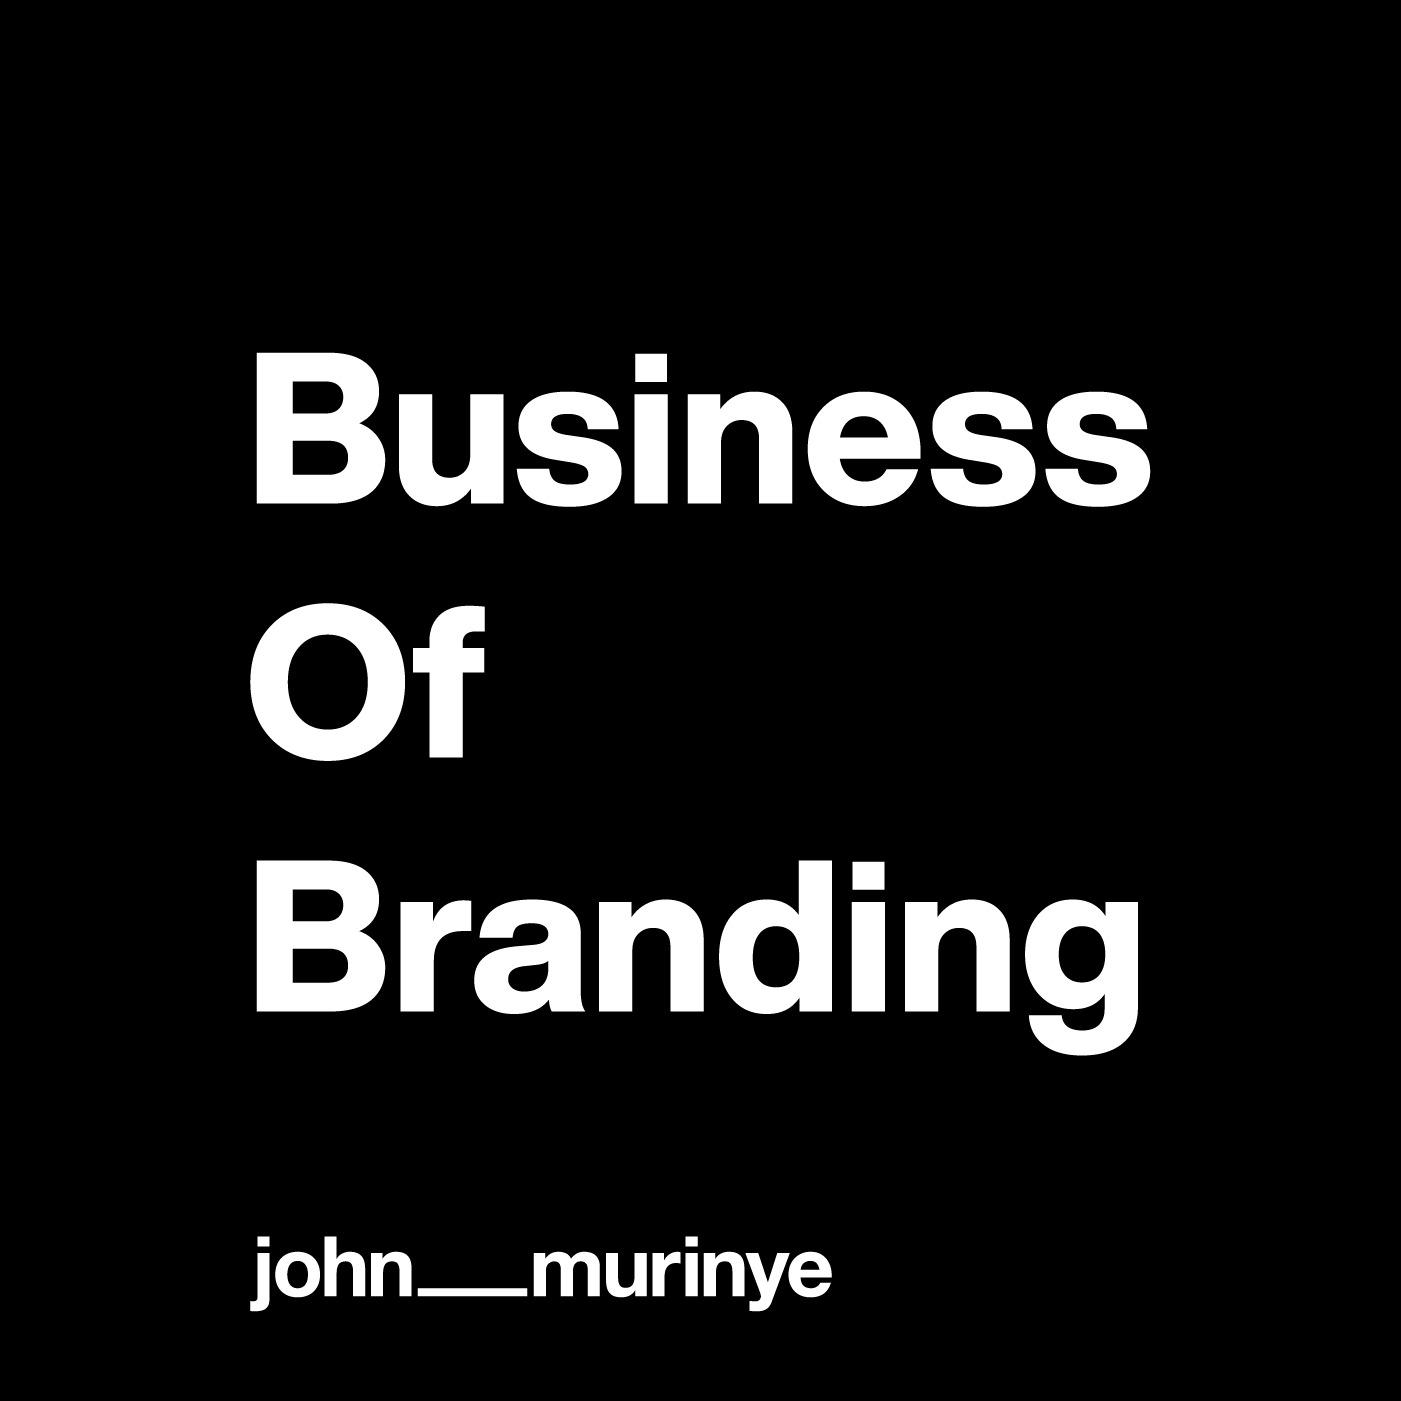 The Business Of Branding